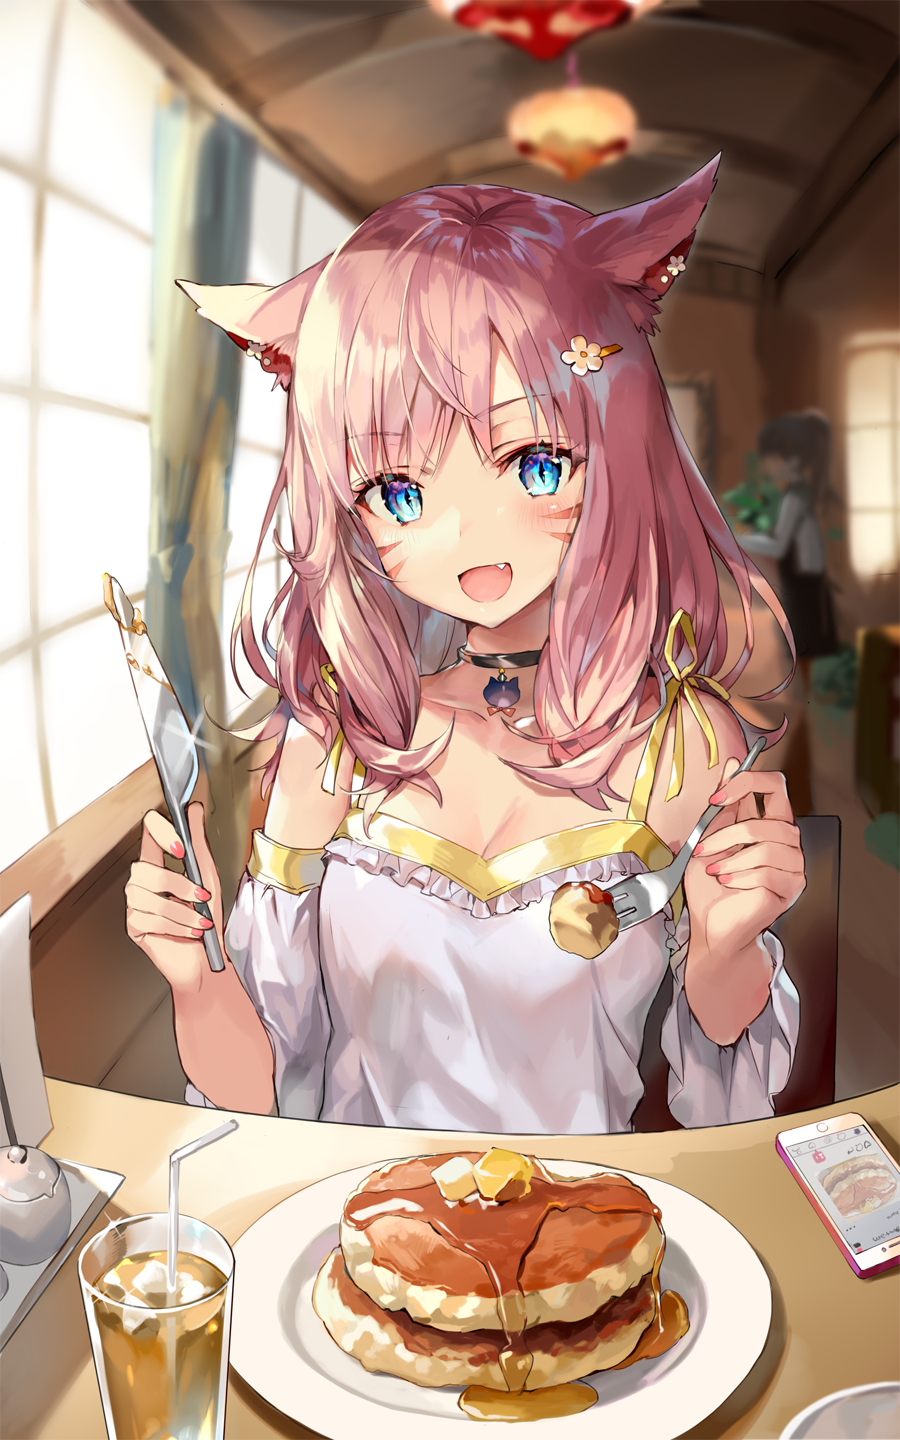 Anime Girls Anime Pancakes Food Fork Knife Drink Vertical Cat Girl Cat Ears Collar Phone Syrup 900x1440